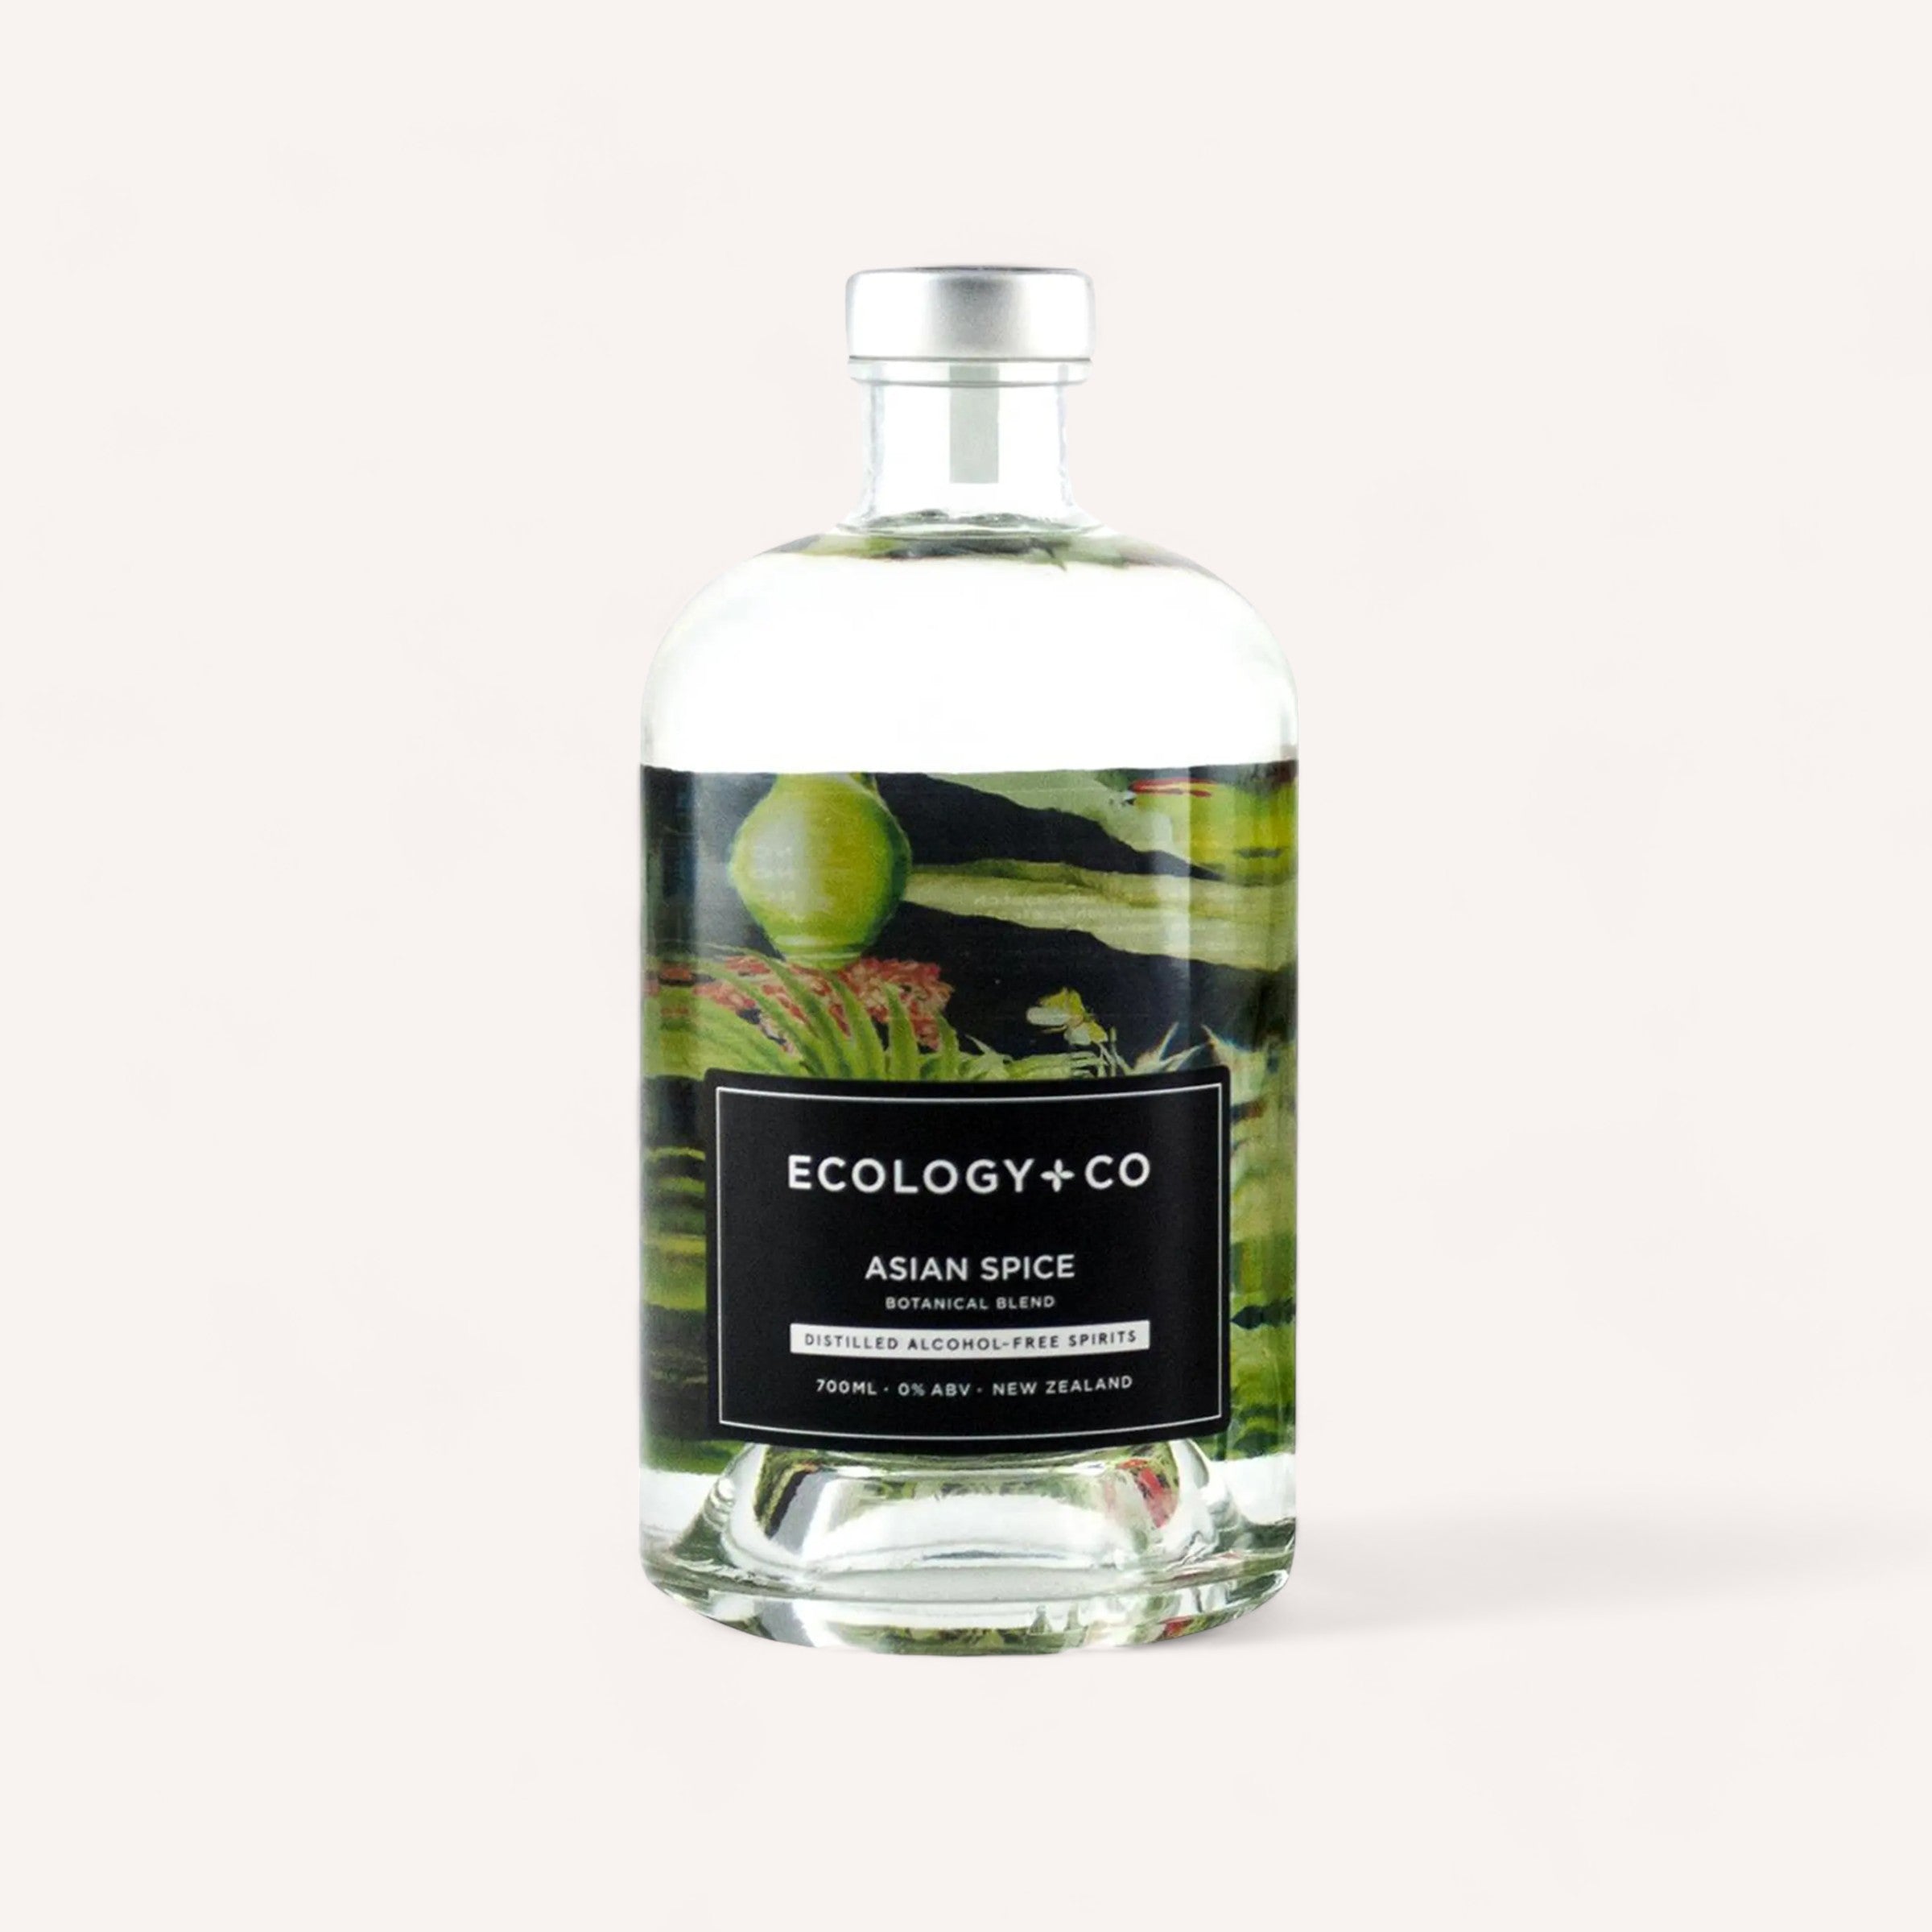 A sleek bottle of Ecology & Co Asian Spice zero alcohol gin, featuring natural, tropical New Zealand ingredients with a hint of cardamom on a clean white background.